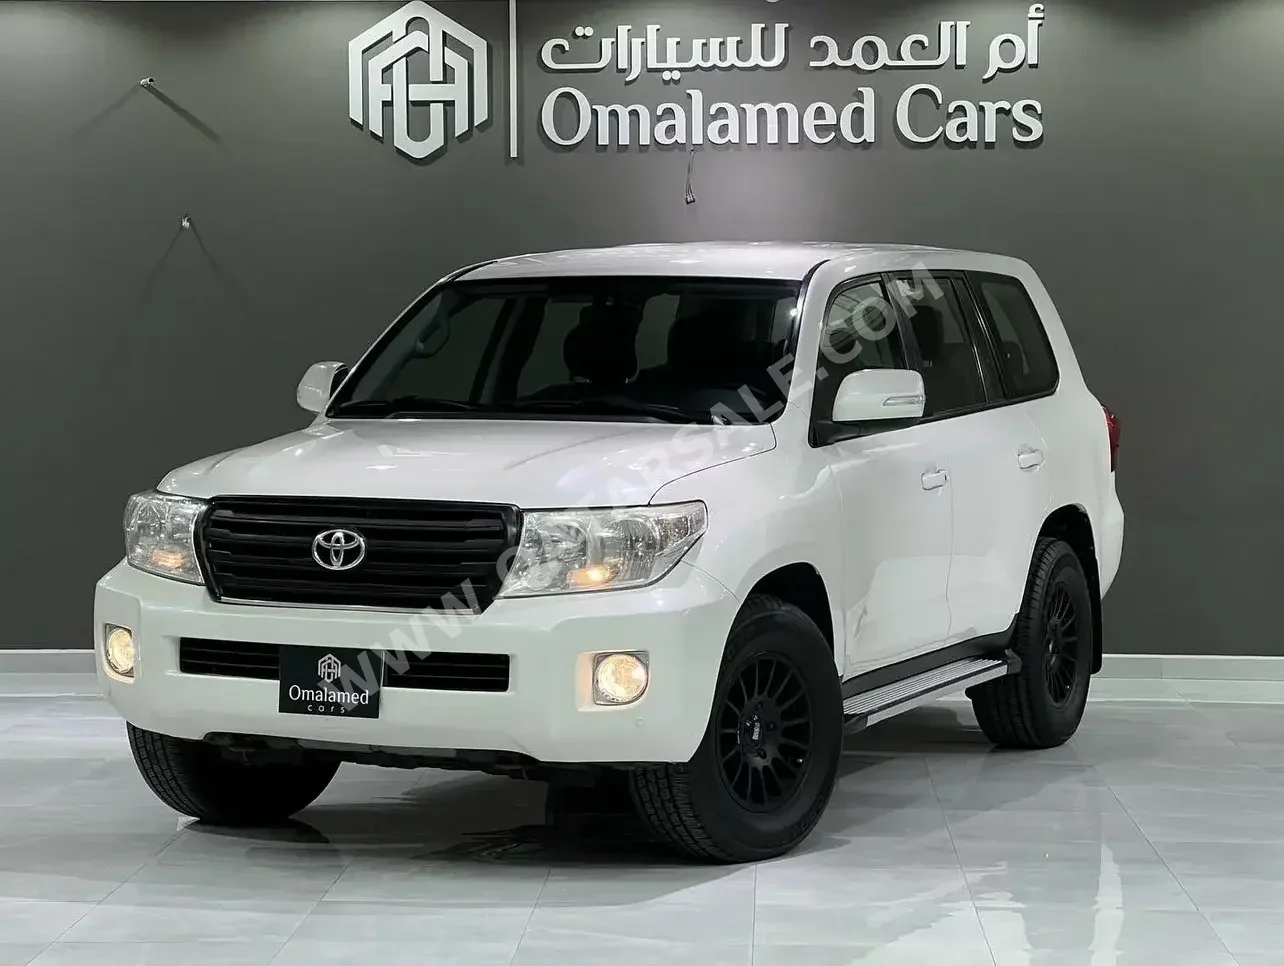 Toyota  Land Cruiser  G  2015  Automatic  263,000 Km  6 Cylinder  Four Wheel Drive (4WD)  SUV  White